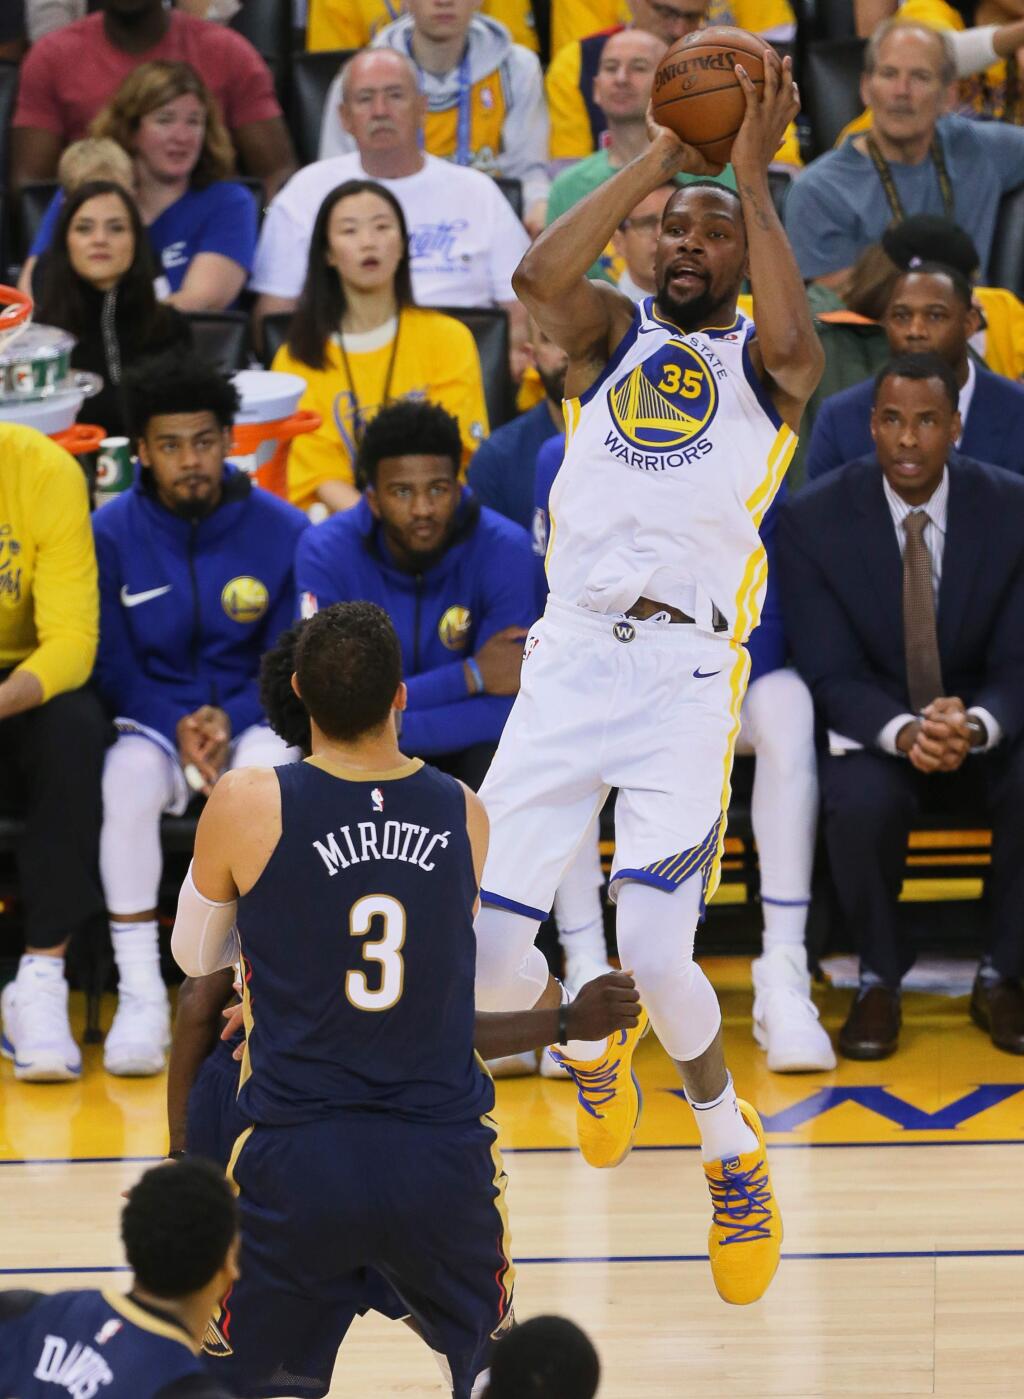 Golden State Warriors forward Kevin Durant hits a fadeaway jumper over New Orleans Pelicans forward Nikola Mirotic, during their game in Oakland on Tuesday, May 8, 2018. (Christopher Chung/ The Press Democrat)